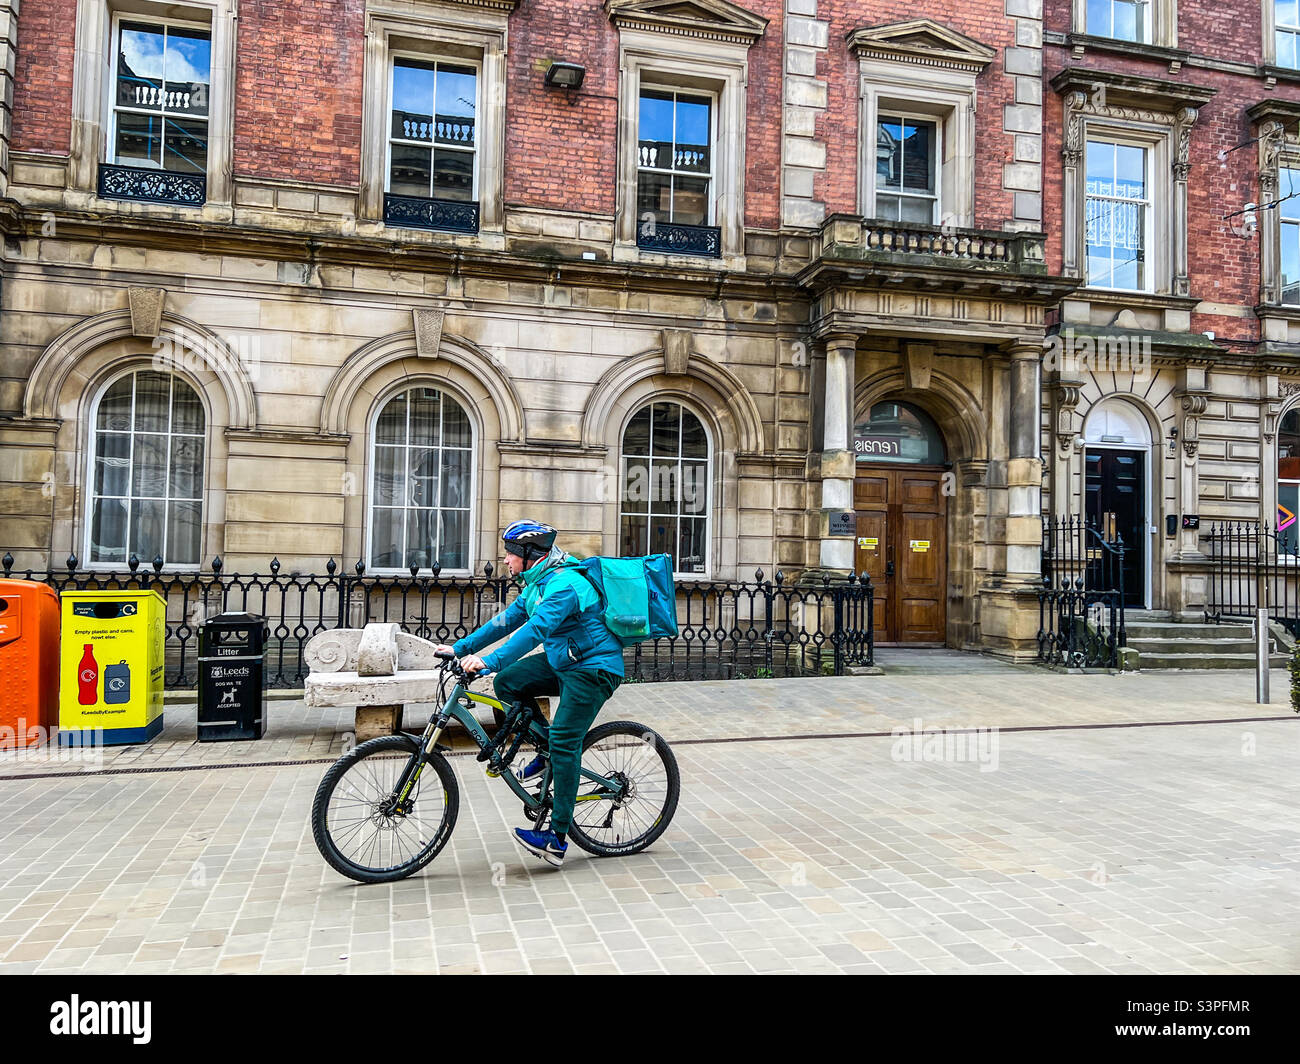 Deliveroo delivery cyclist delivering takeaway food in Leeds city centre Stock Photo